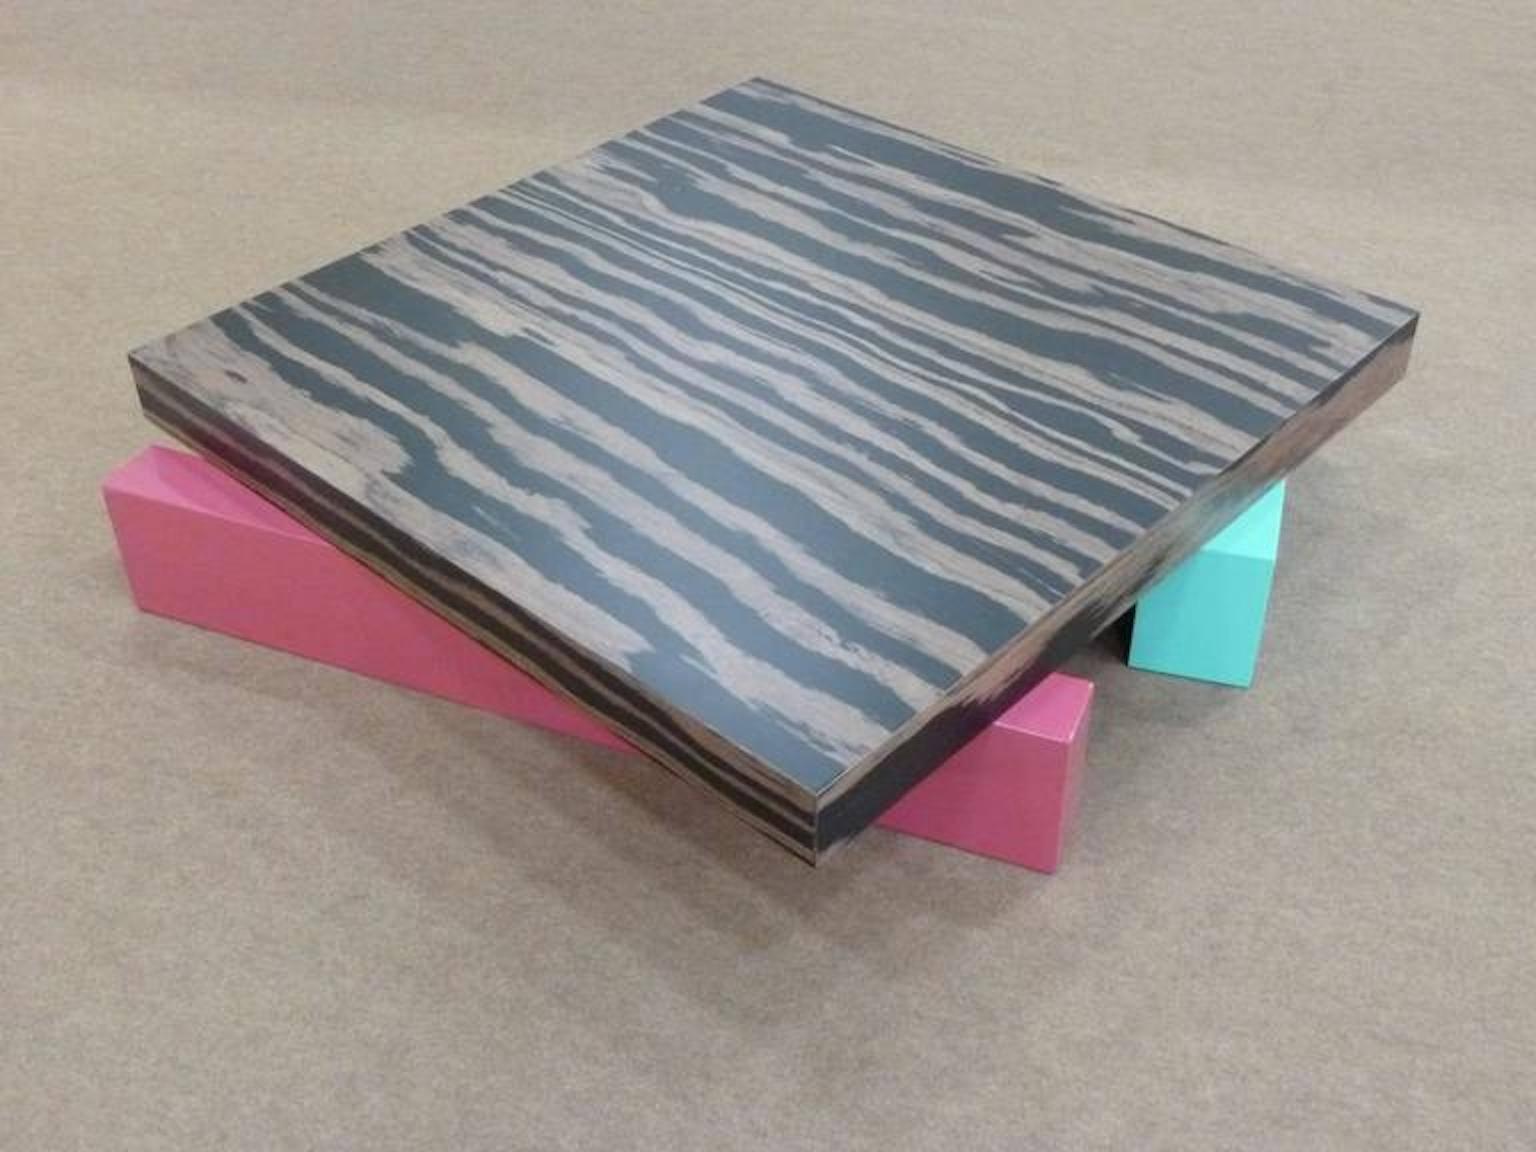 A beautiful coffee table in laminated wood designed by Ettore Sottsass for Alessi, circa 1990.

Biography
Ettore Sottsass (Italian, 1917–2007) was an architect and designer, labeled the godfather of Italian design. Born in Austria and raised in